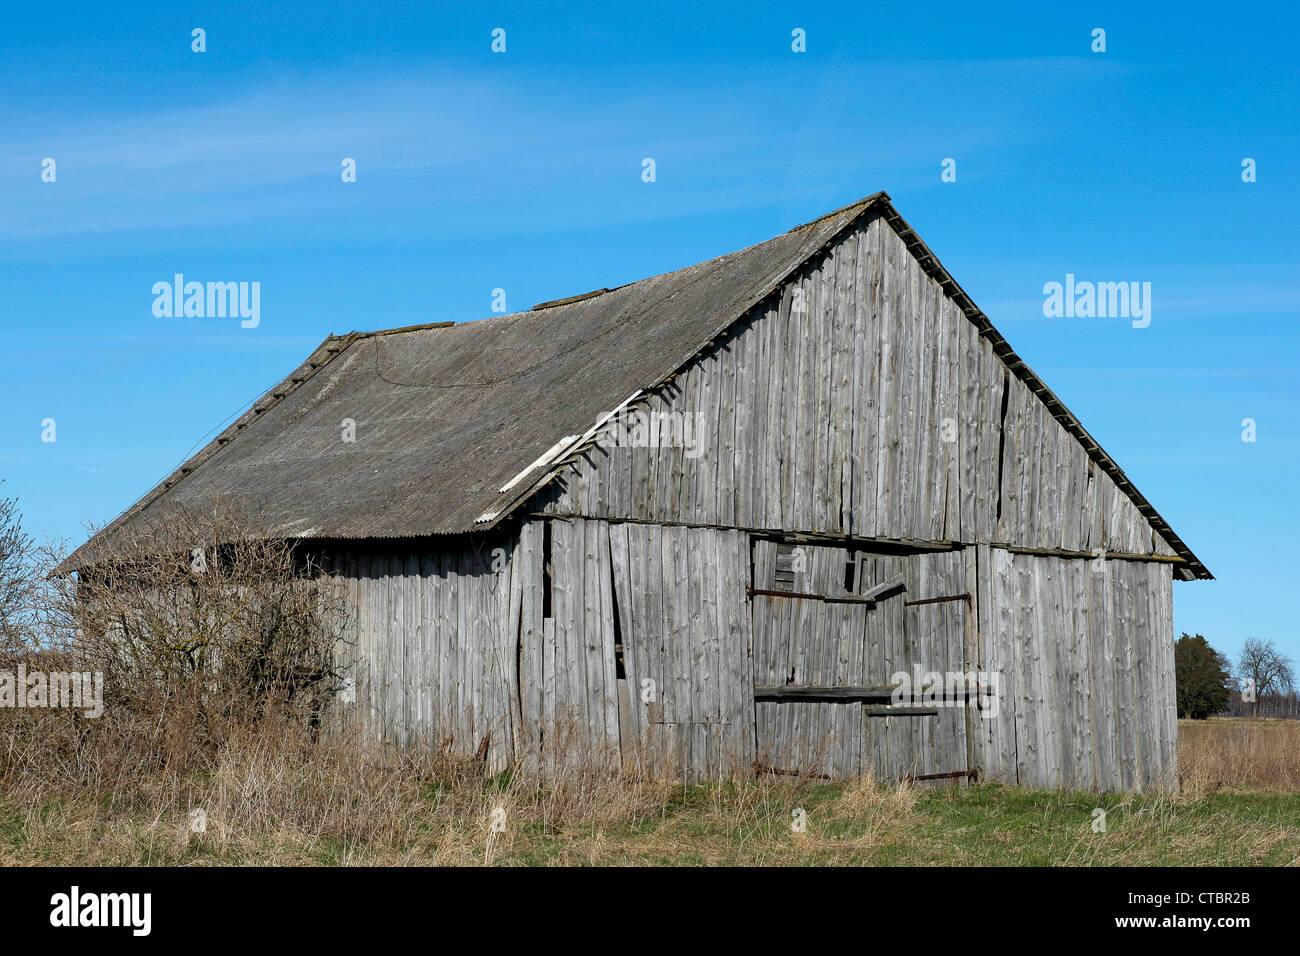 old wooden barn in the countryside Stock Photo